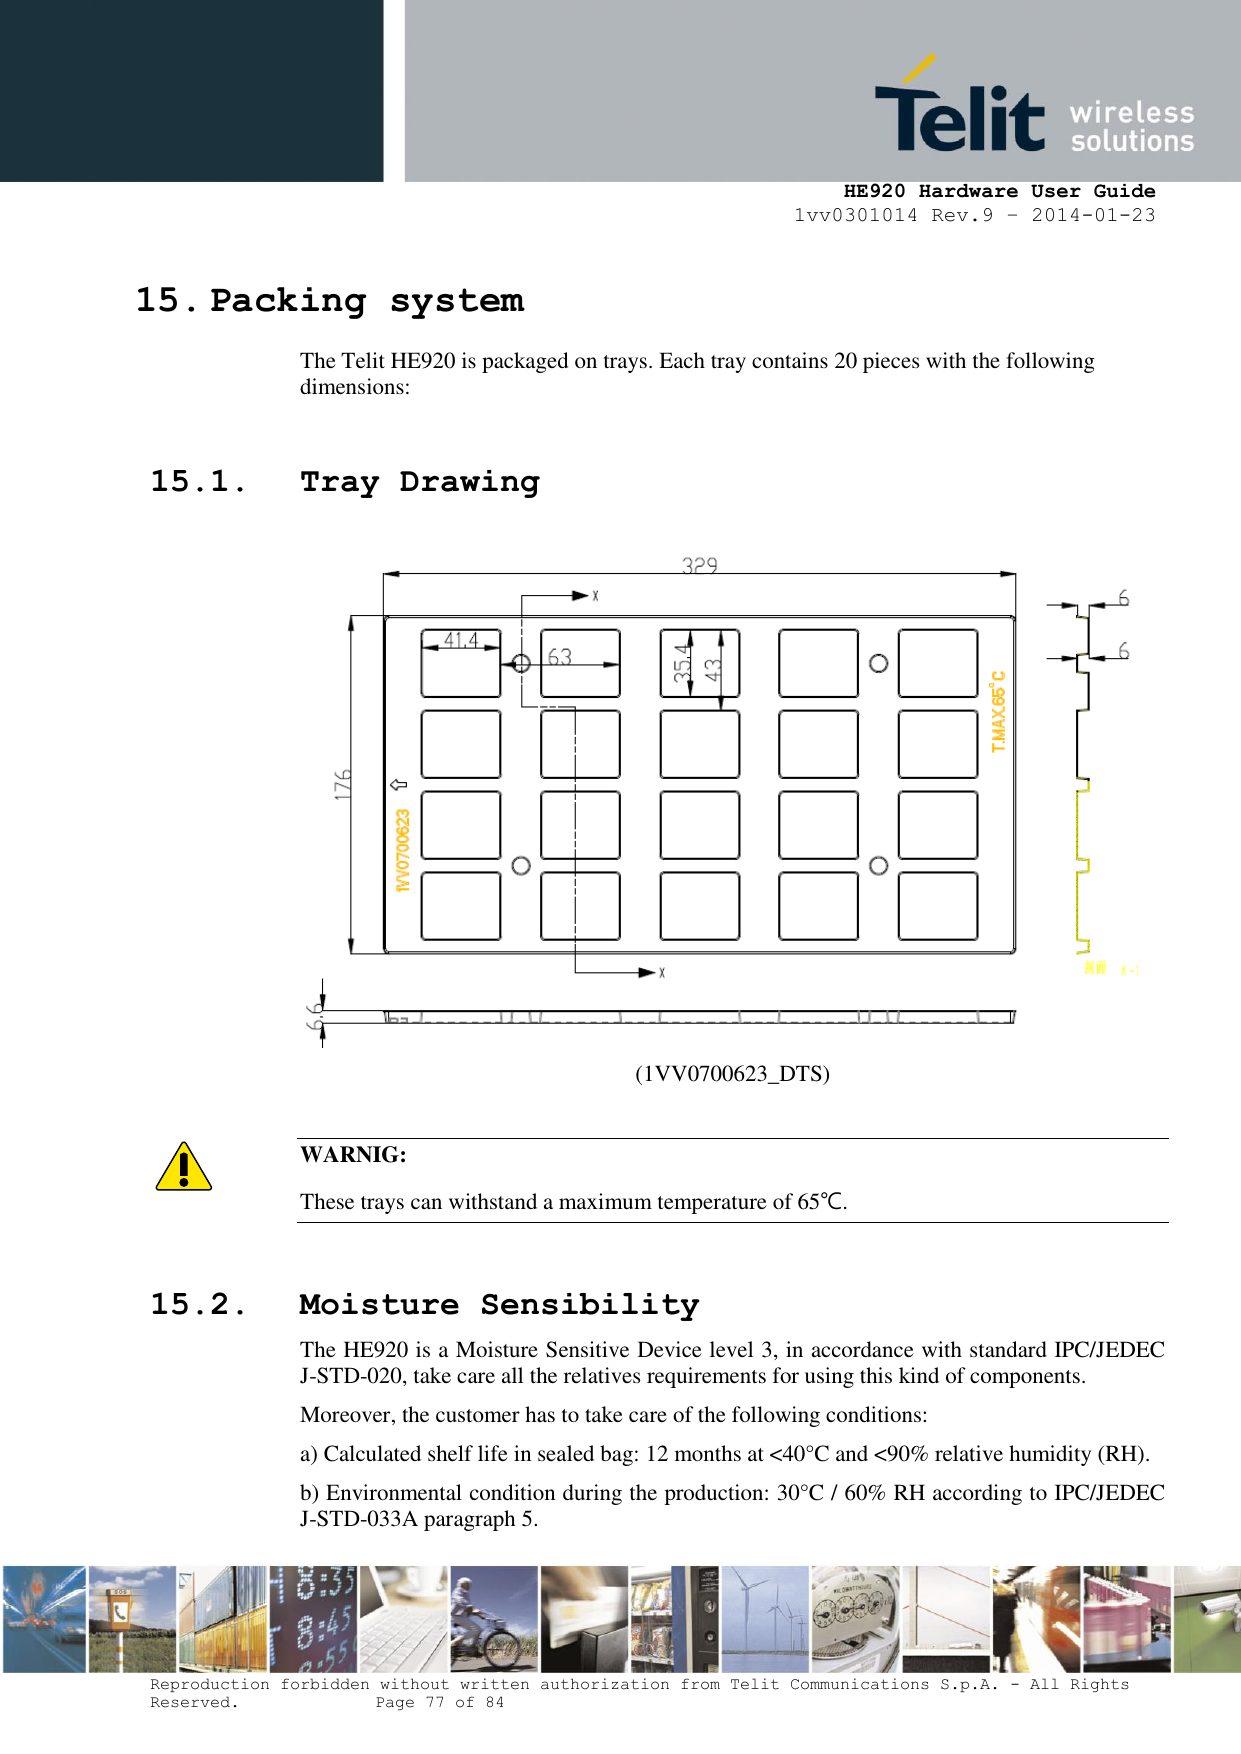     HE920 Hardware User Guide 1vv0301014 Rev.9 – 2014-01-23 Reproduction forbidden without written authorization from Telit Communications S.p.A. - All Rights Reserved.    Page 77 of 84  15. Packing system The Telit HE920 is packaged on trays. Each tray contains 20 pieces with the following dimensions:  15.1. Tray Drawing   (1VV0700623_DTS)  WARNIG: These trays can withstand a maximum temperature of 65℃.   15.2. Moisture Sensibility The HE920 is a Moisture Sensitive Device level 3, in accordance with standard IPC/JEDEC J-STD-020, take care all the relatives requirements for using this kind of components. Moreover, the customer has to take care of the following conditions: a) Calculated shelf life in sealed bag: 12 months at &lt;40°C and &lt;90% relative humidity (RH). b) Environmental condition during the production: 30°C / 60% RH according to IPC/JEDEC J-STD-033A paragraph 5.  